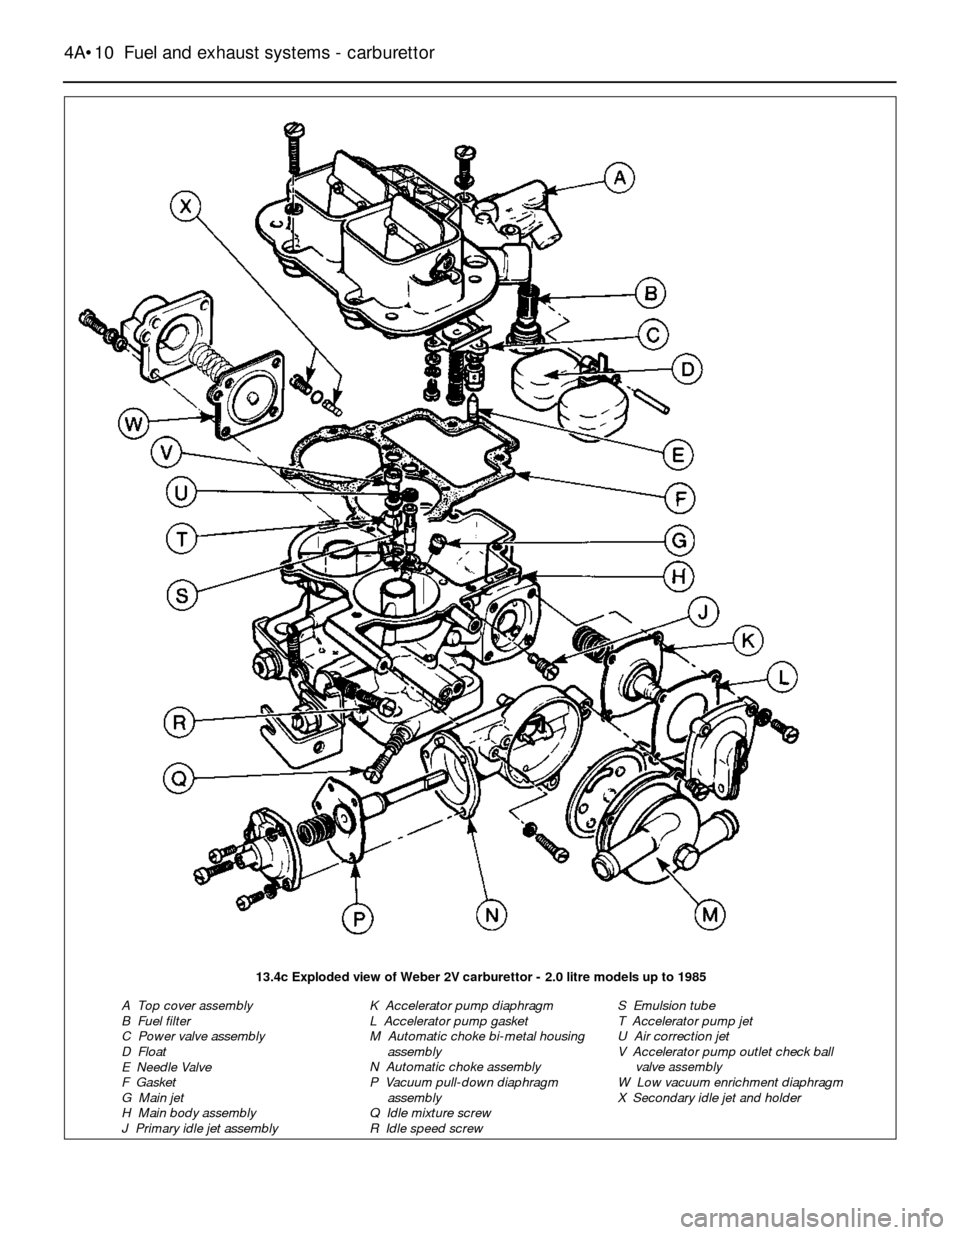 FORD SIERRA 1990 2.G Fuel And Exhaust Systems Carburettor Workshop Manual 4A•10Fuel and exhaust systems - carburettor
13.4c Exploded view of Weber 2V carburettor - 2.0 litre models up to 1985
A  Top cover assembly
B  Fuel filter
C  Power valve assembly
D  Float
E  Needle 